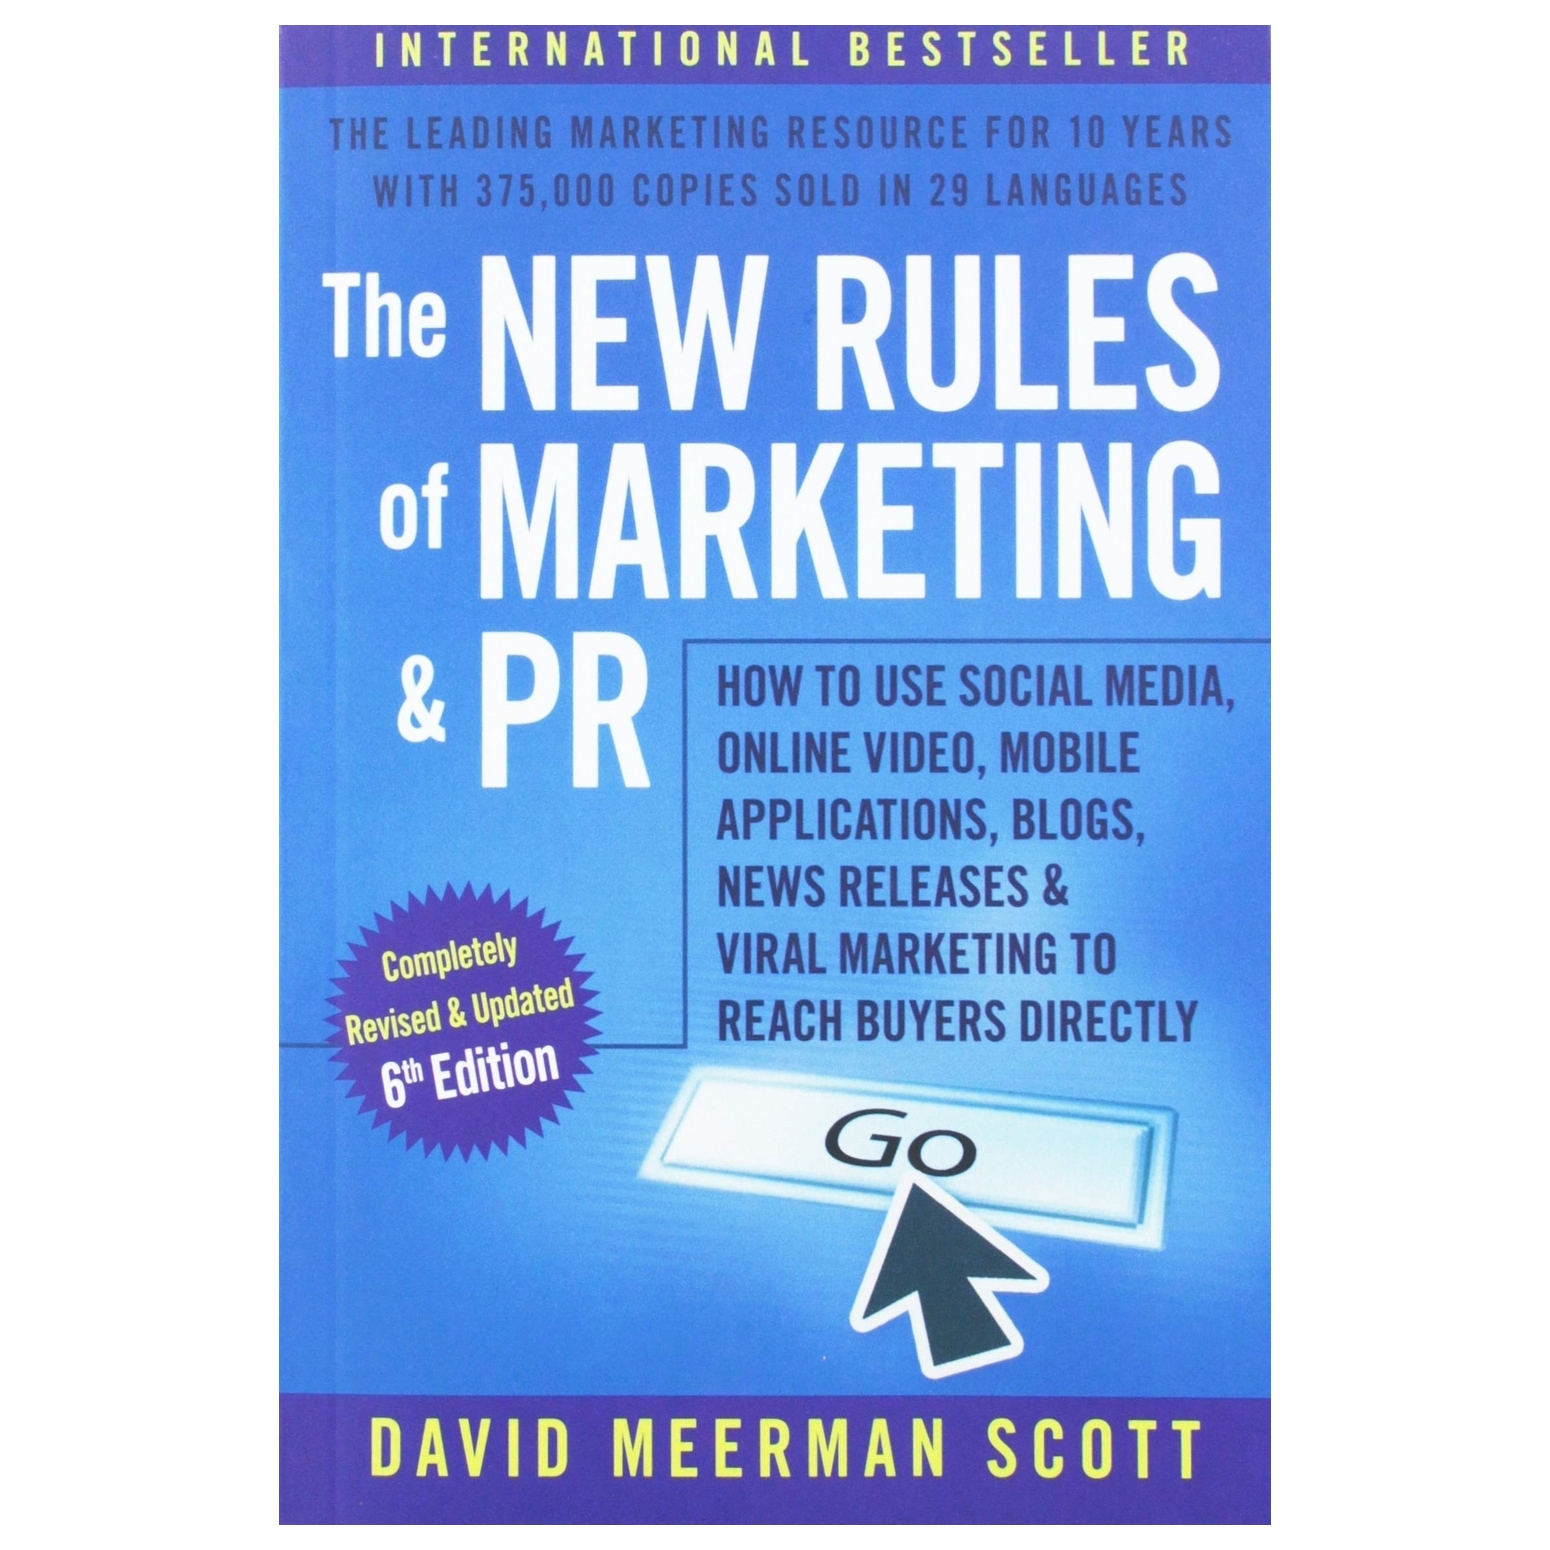 The New Rules Of Marketing & Pr: How To Use Social Media, Online Video, Mobile Applications, Blogs, News Releases, And Viral Marketing To Reach Buyers Directly